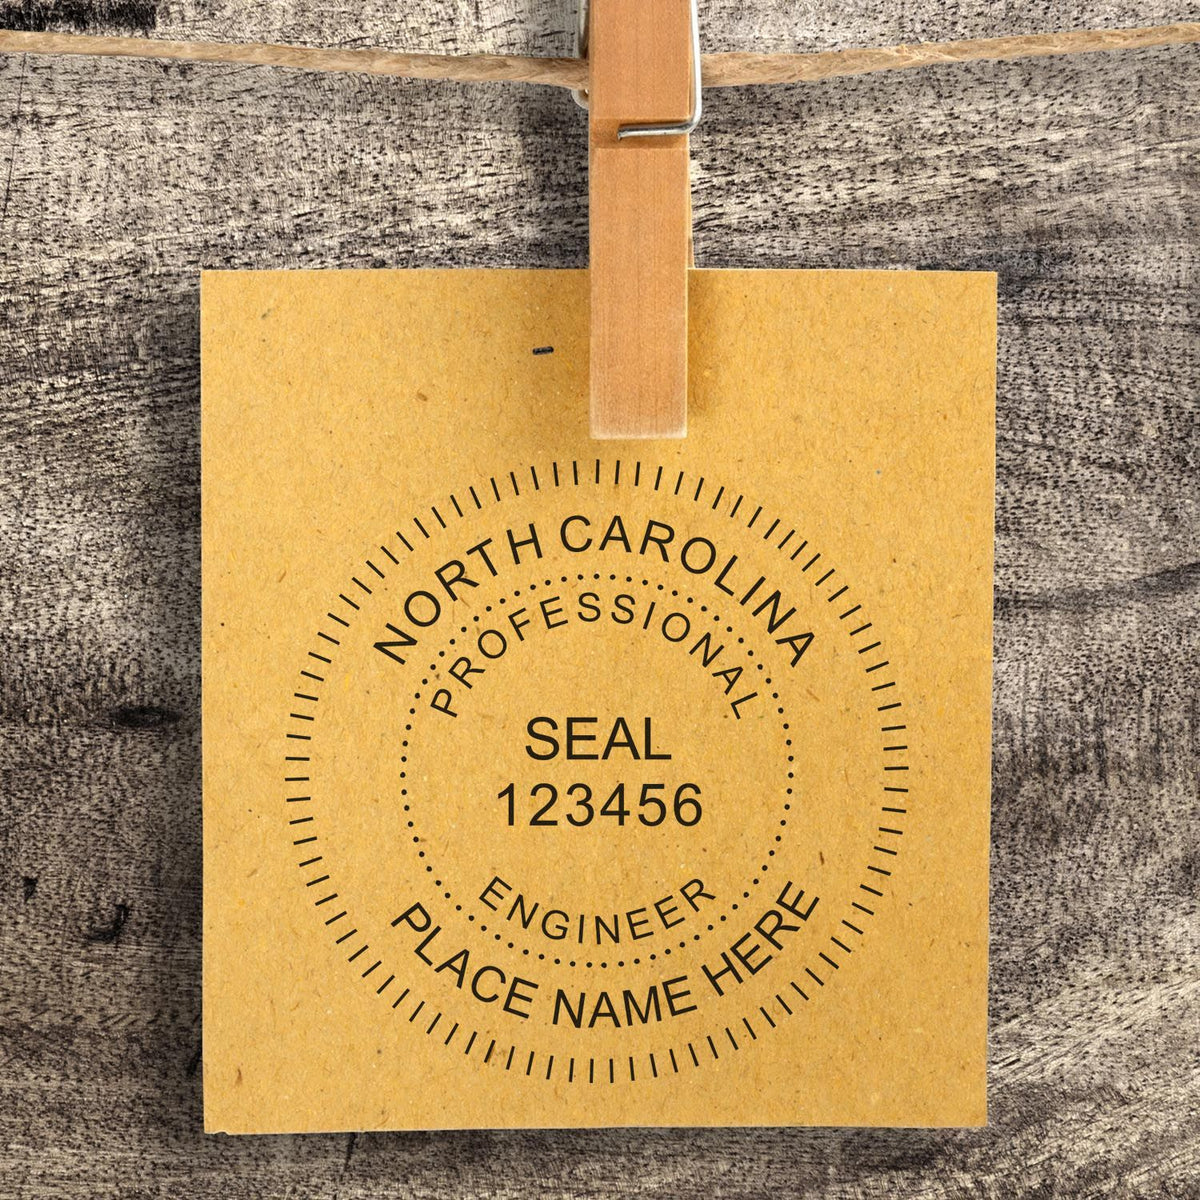 This paper is stamped with a sample imprint of the North Carolina Professional Engineer Seal Stamp, signifying its quality and reliability.